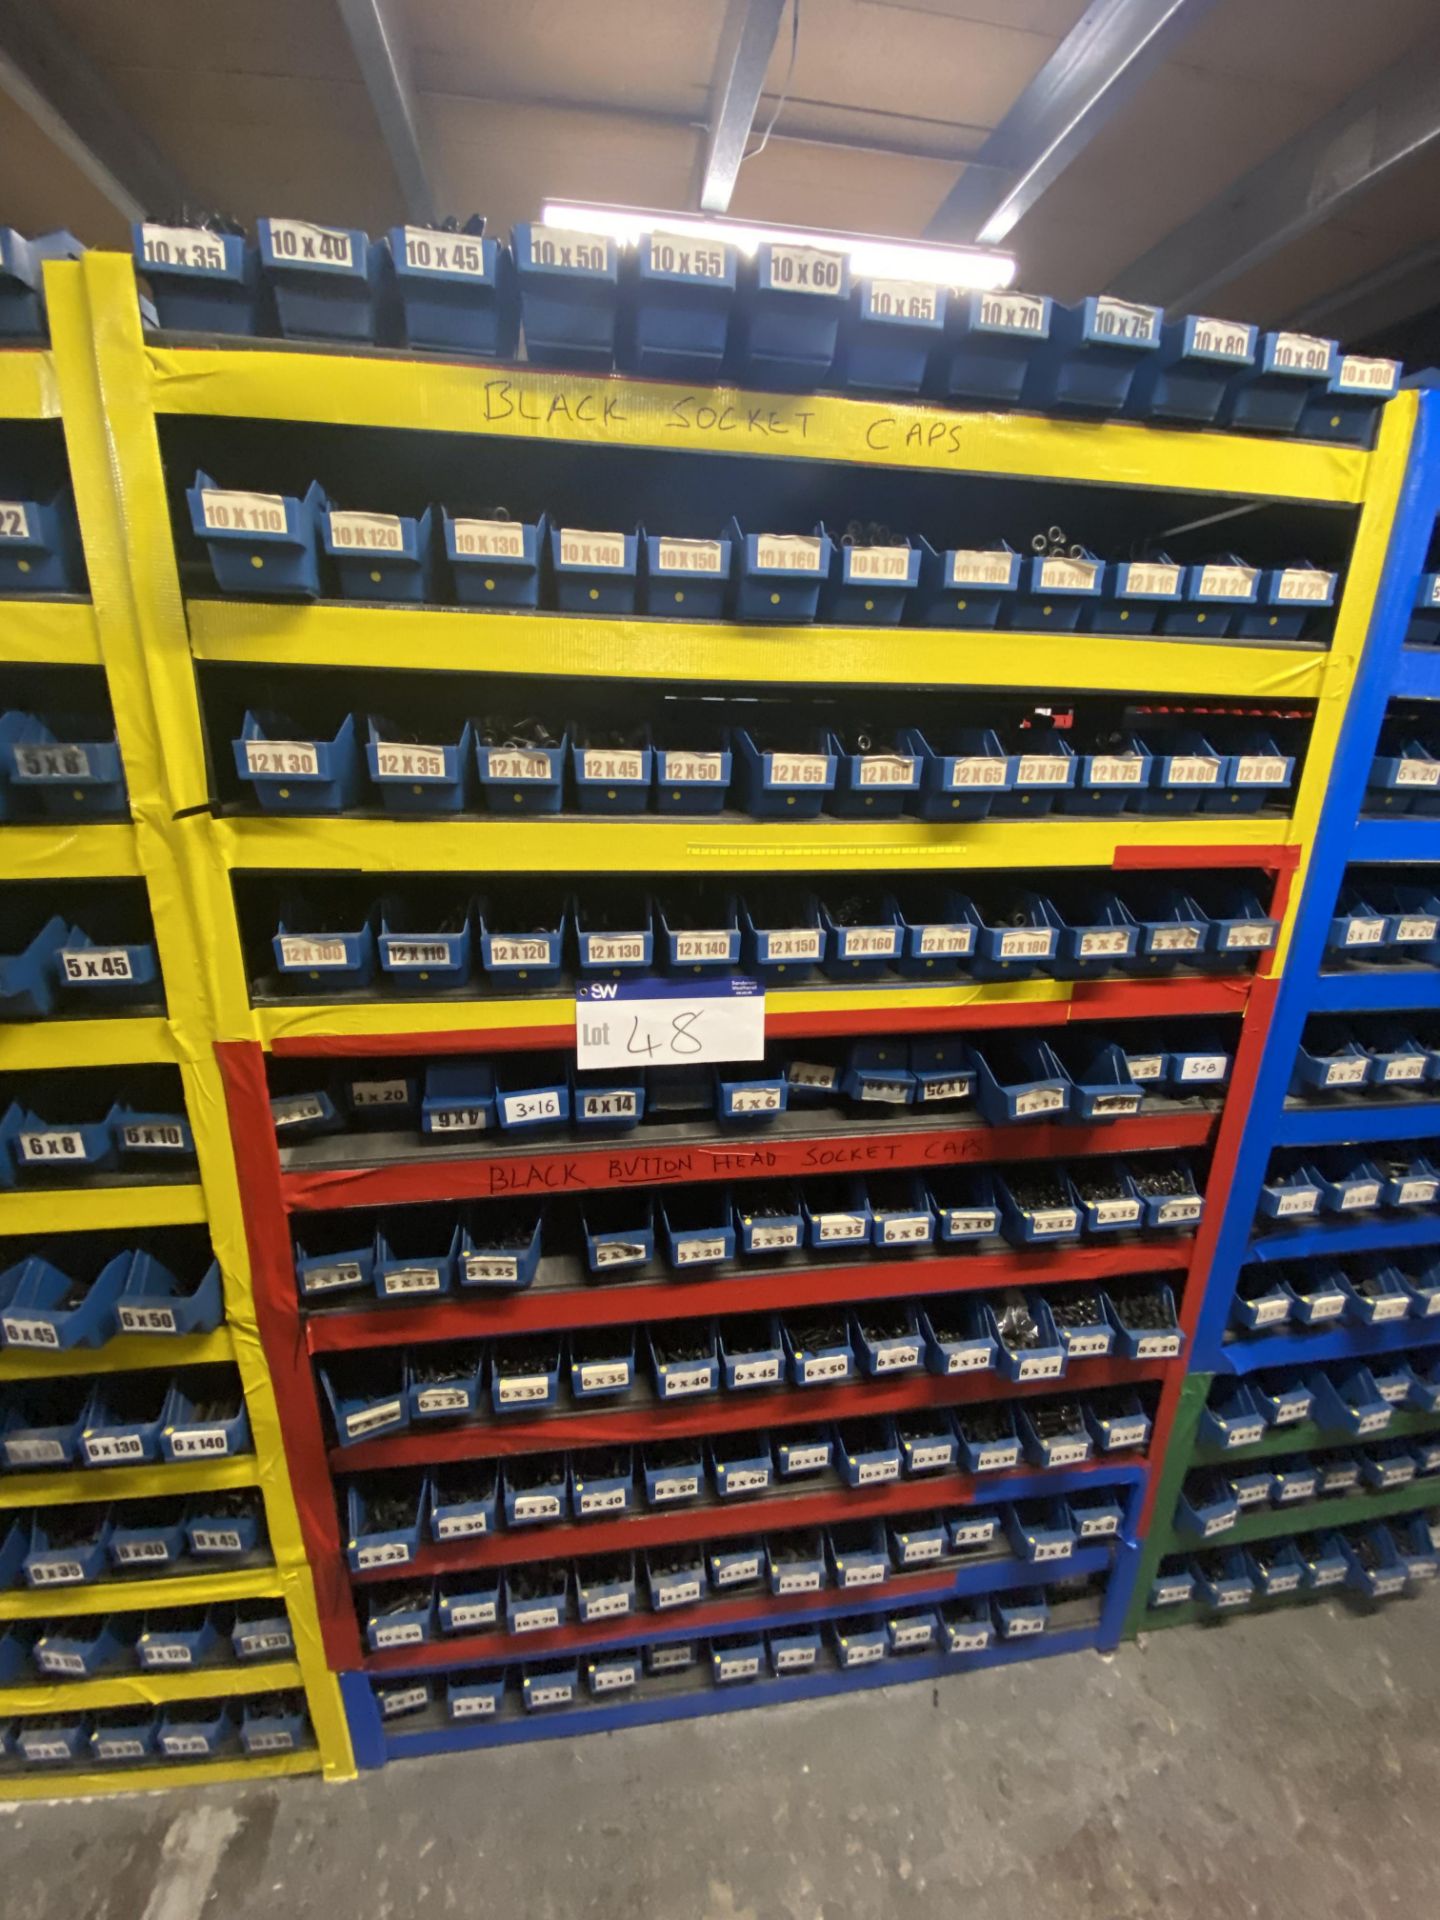 Quantity of Self Colour All Black Socket Caps & Buttons, with plastic stacking bins, as set out on